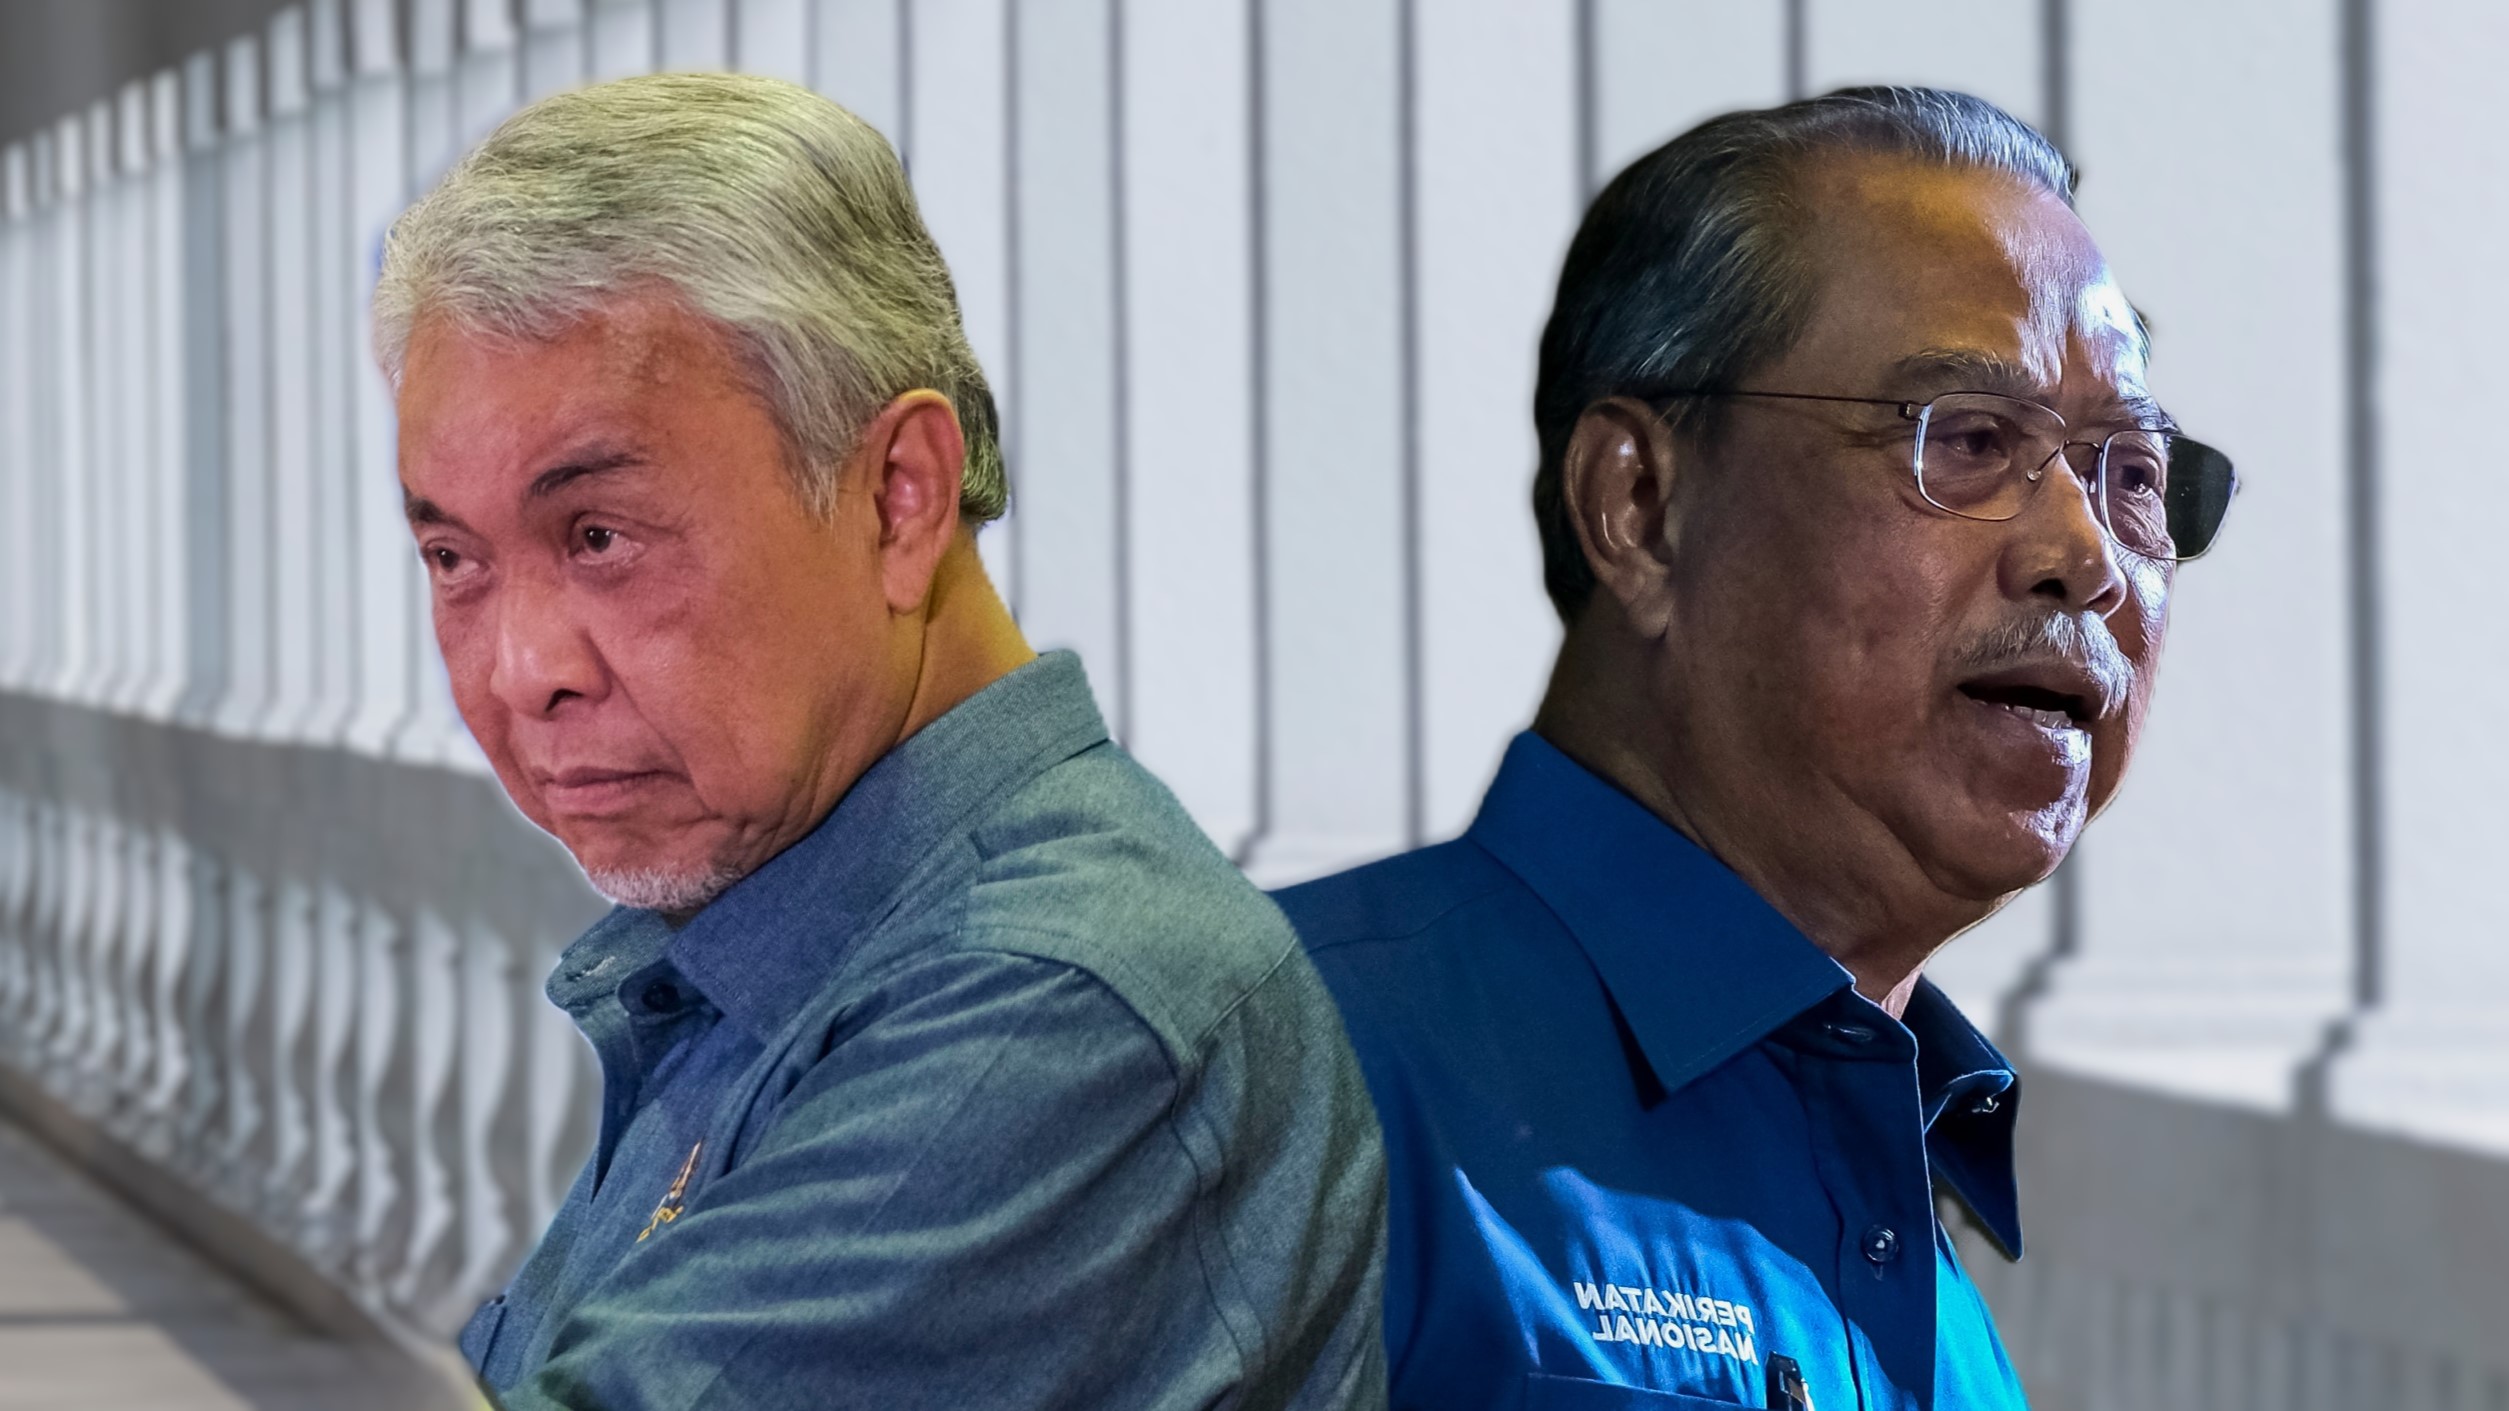 Hidden agenda in Zahid and Muhyiddin's legal truce? Unlikely, say analysts